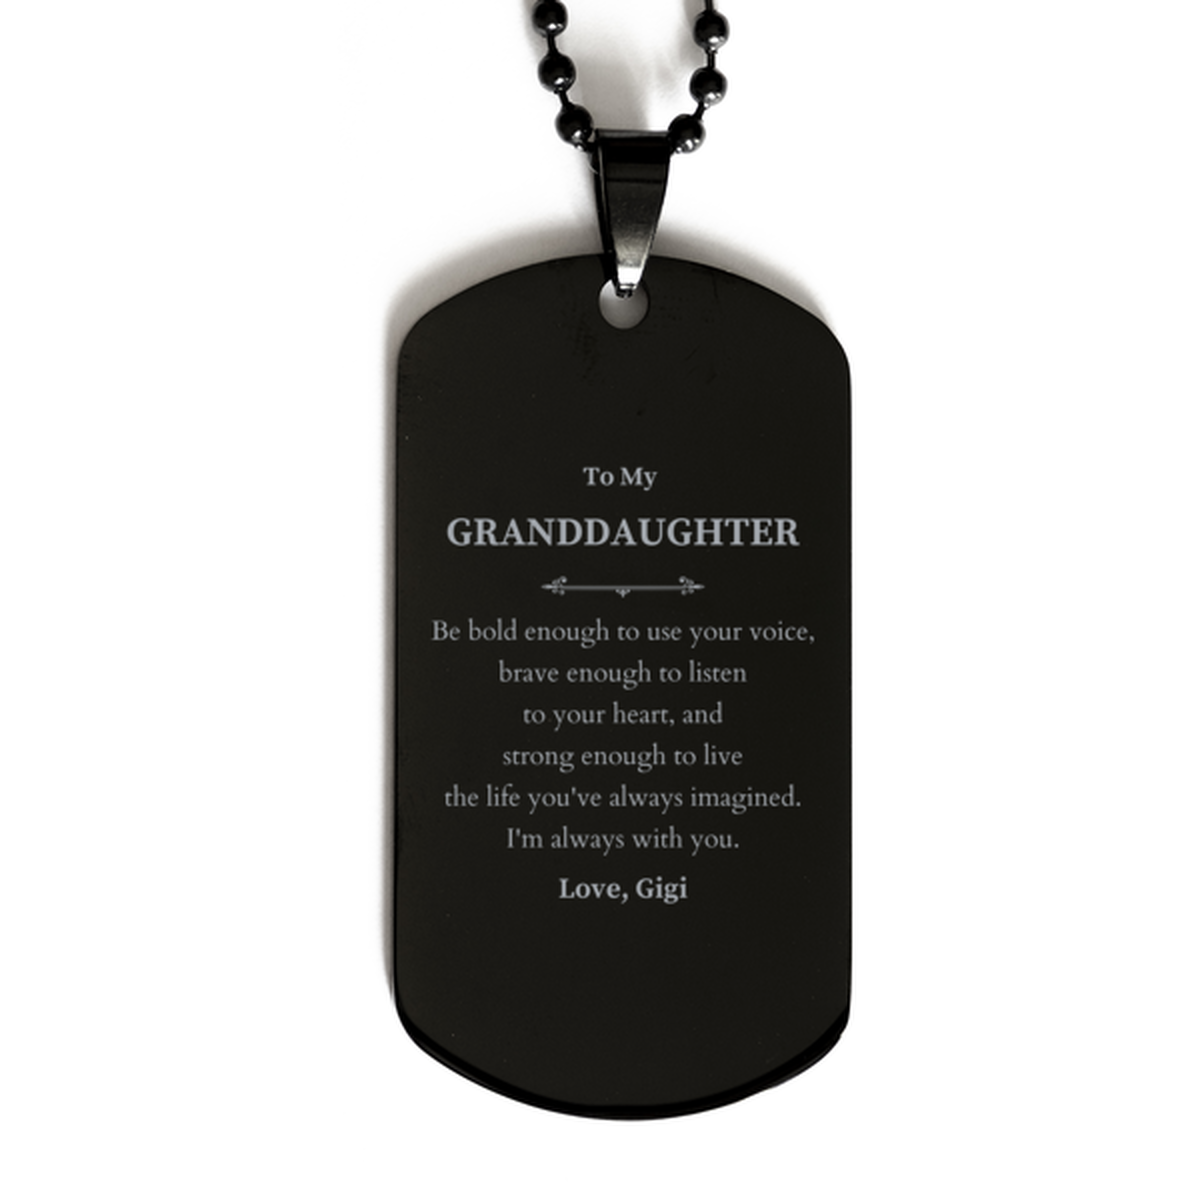 Keepsake Granddaughter Black Dog Tag Gift Idea Graduation Christmas Birthday Granddaughter from Gigi, Granddaughter Be bold enough to use your voice, brave enough to listen to your heart. Love, Gigi